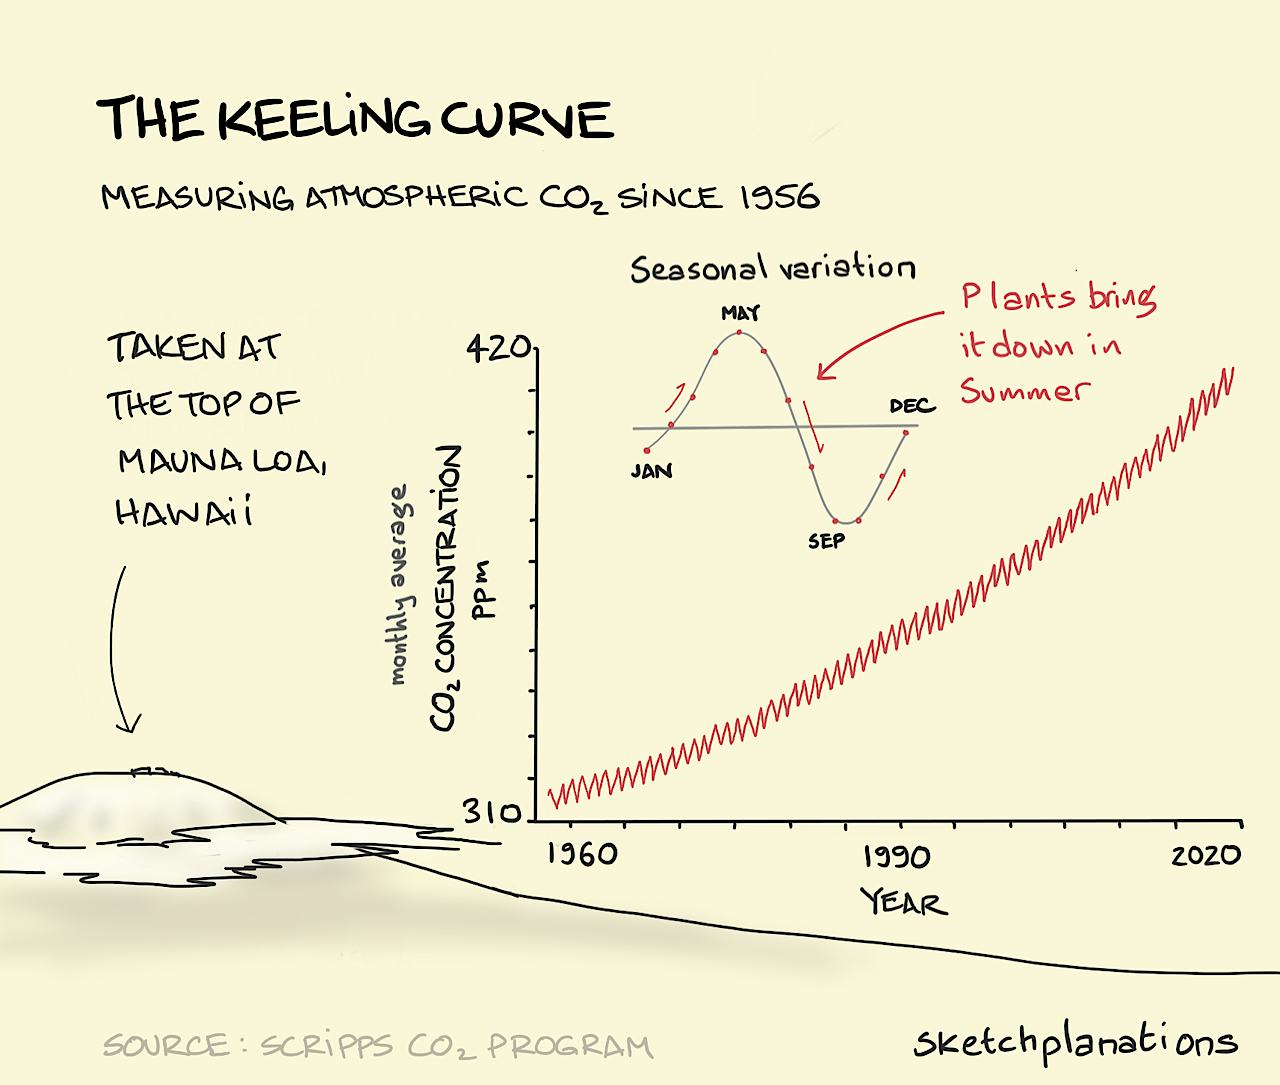 The Keeling curve - Sketchplanations